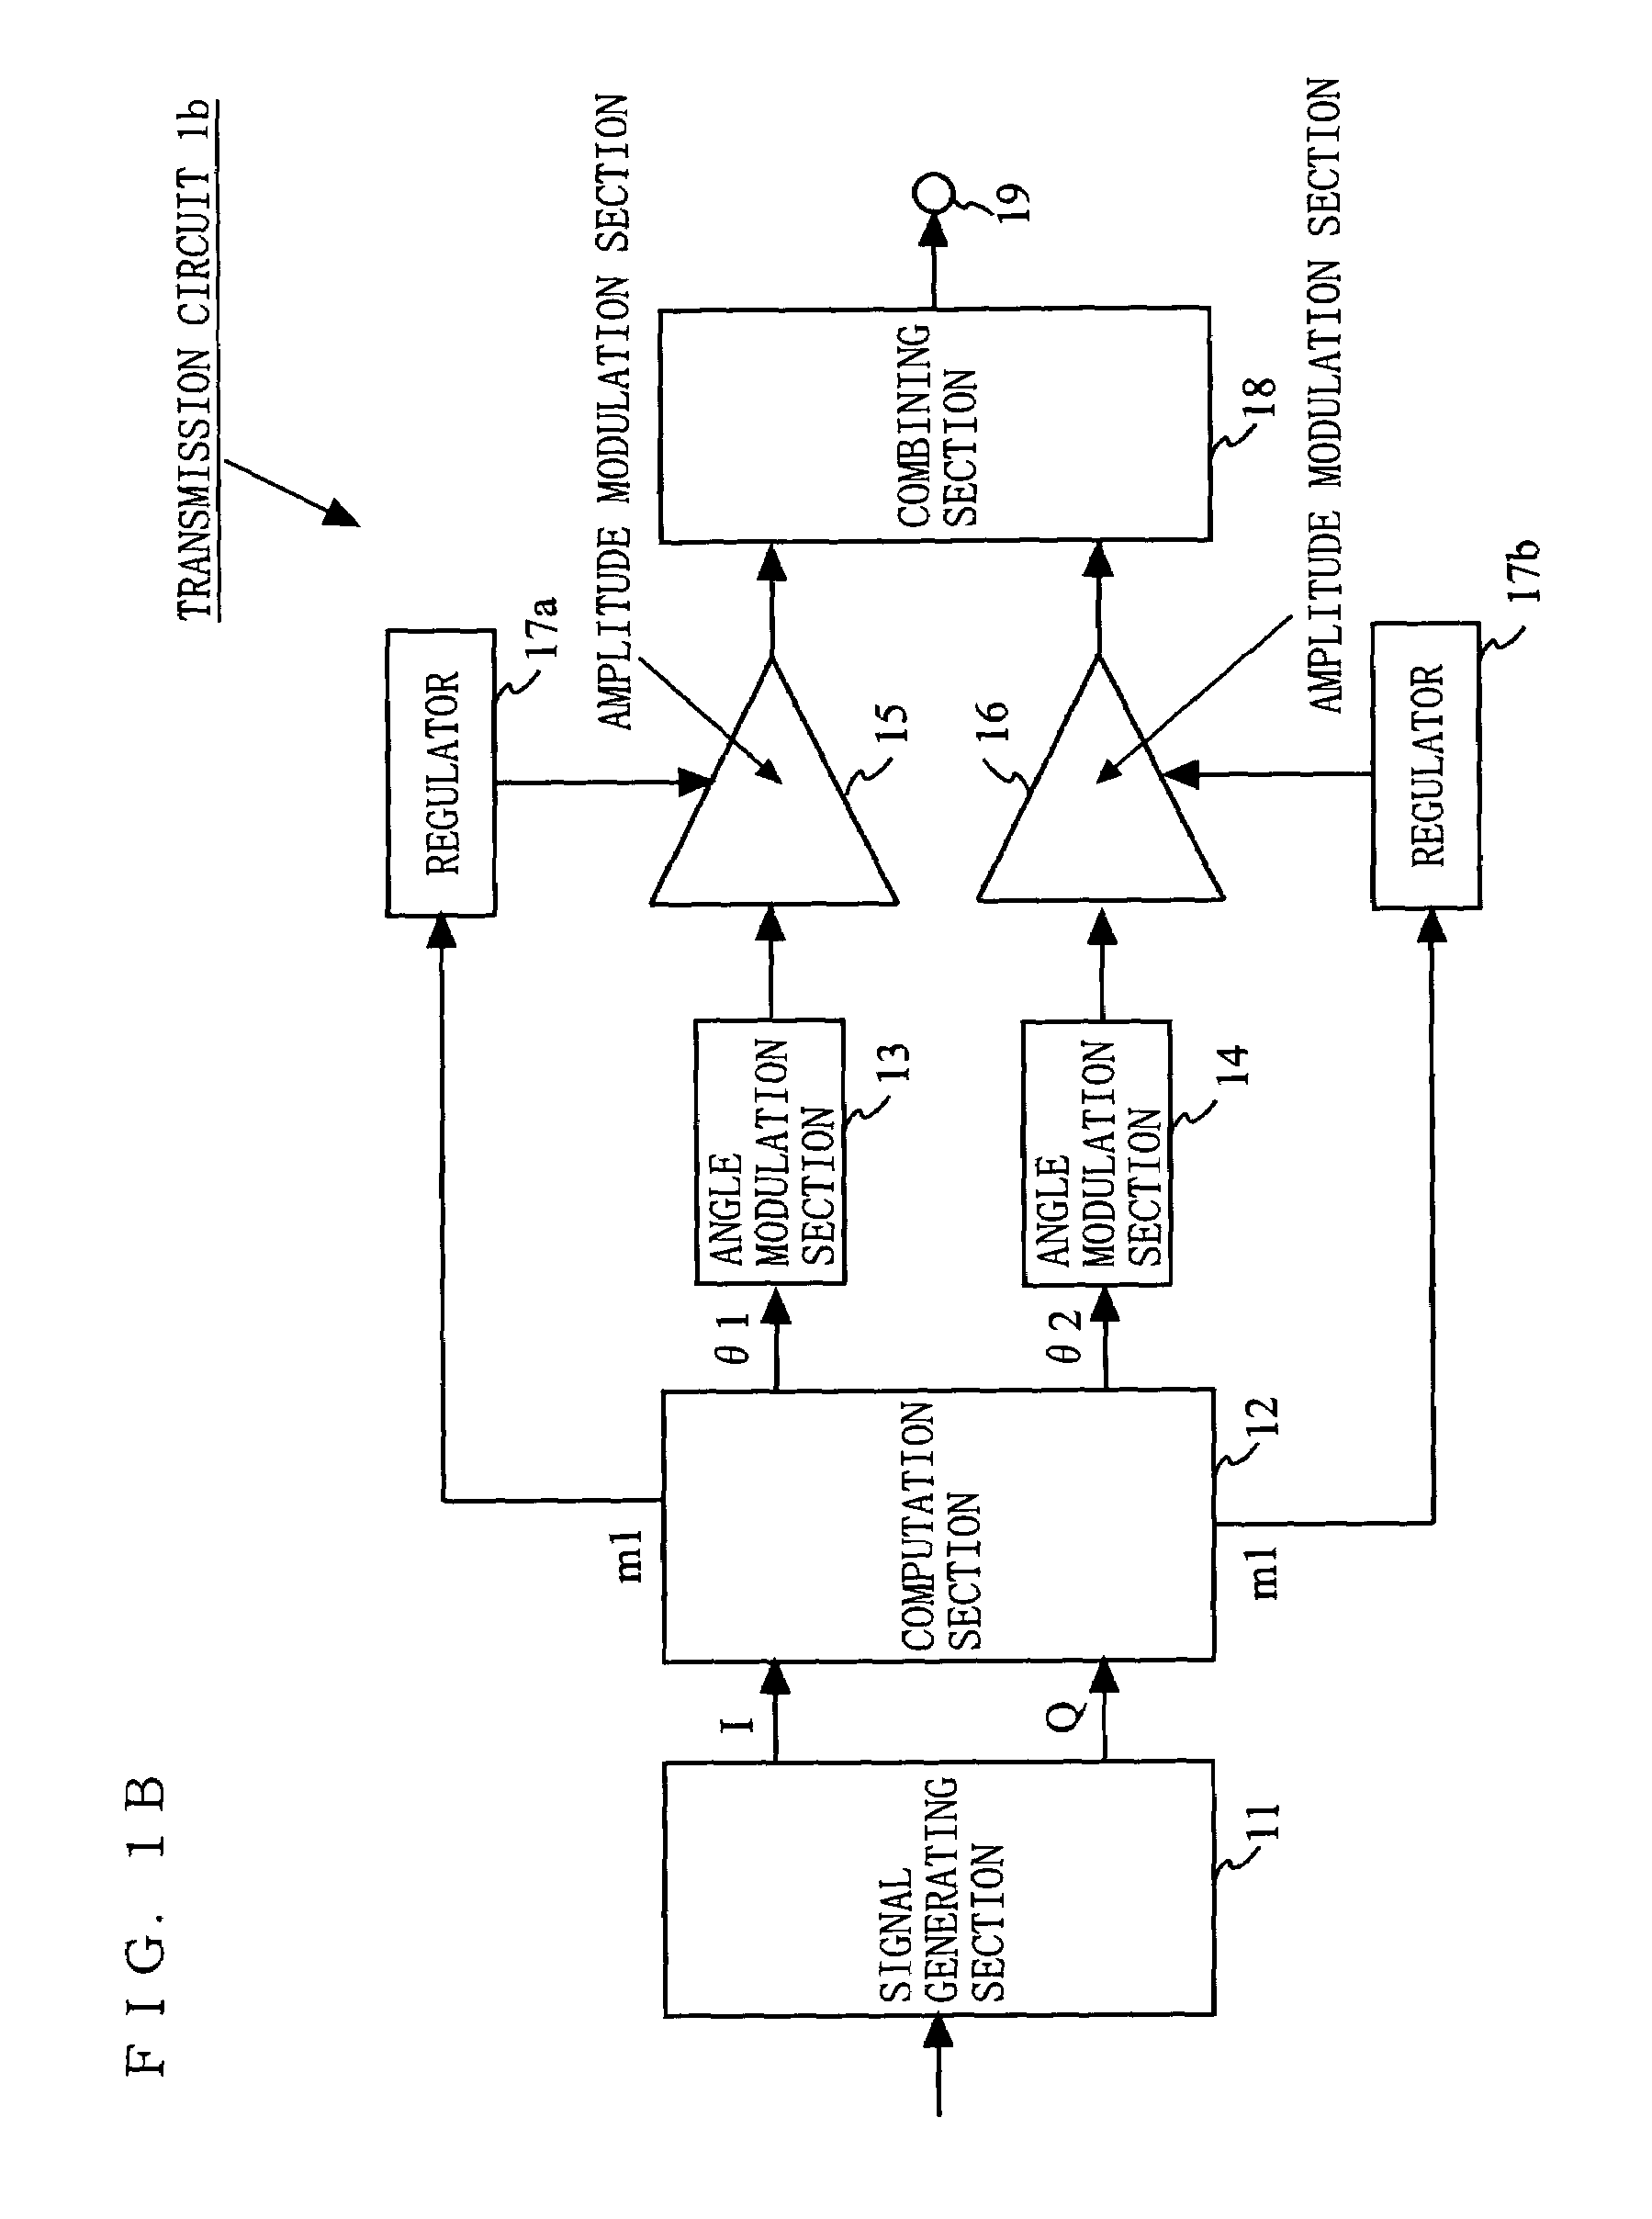 Transmission circuit and communication apparatus employing the same